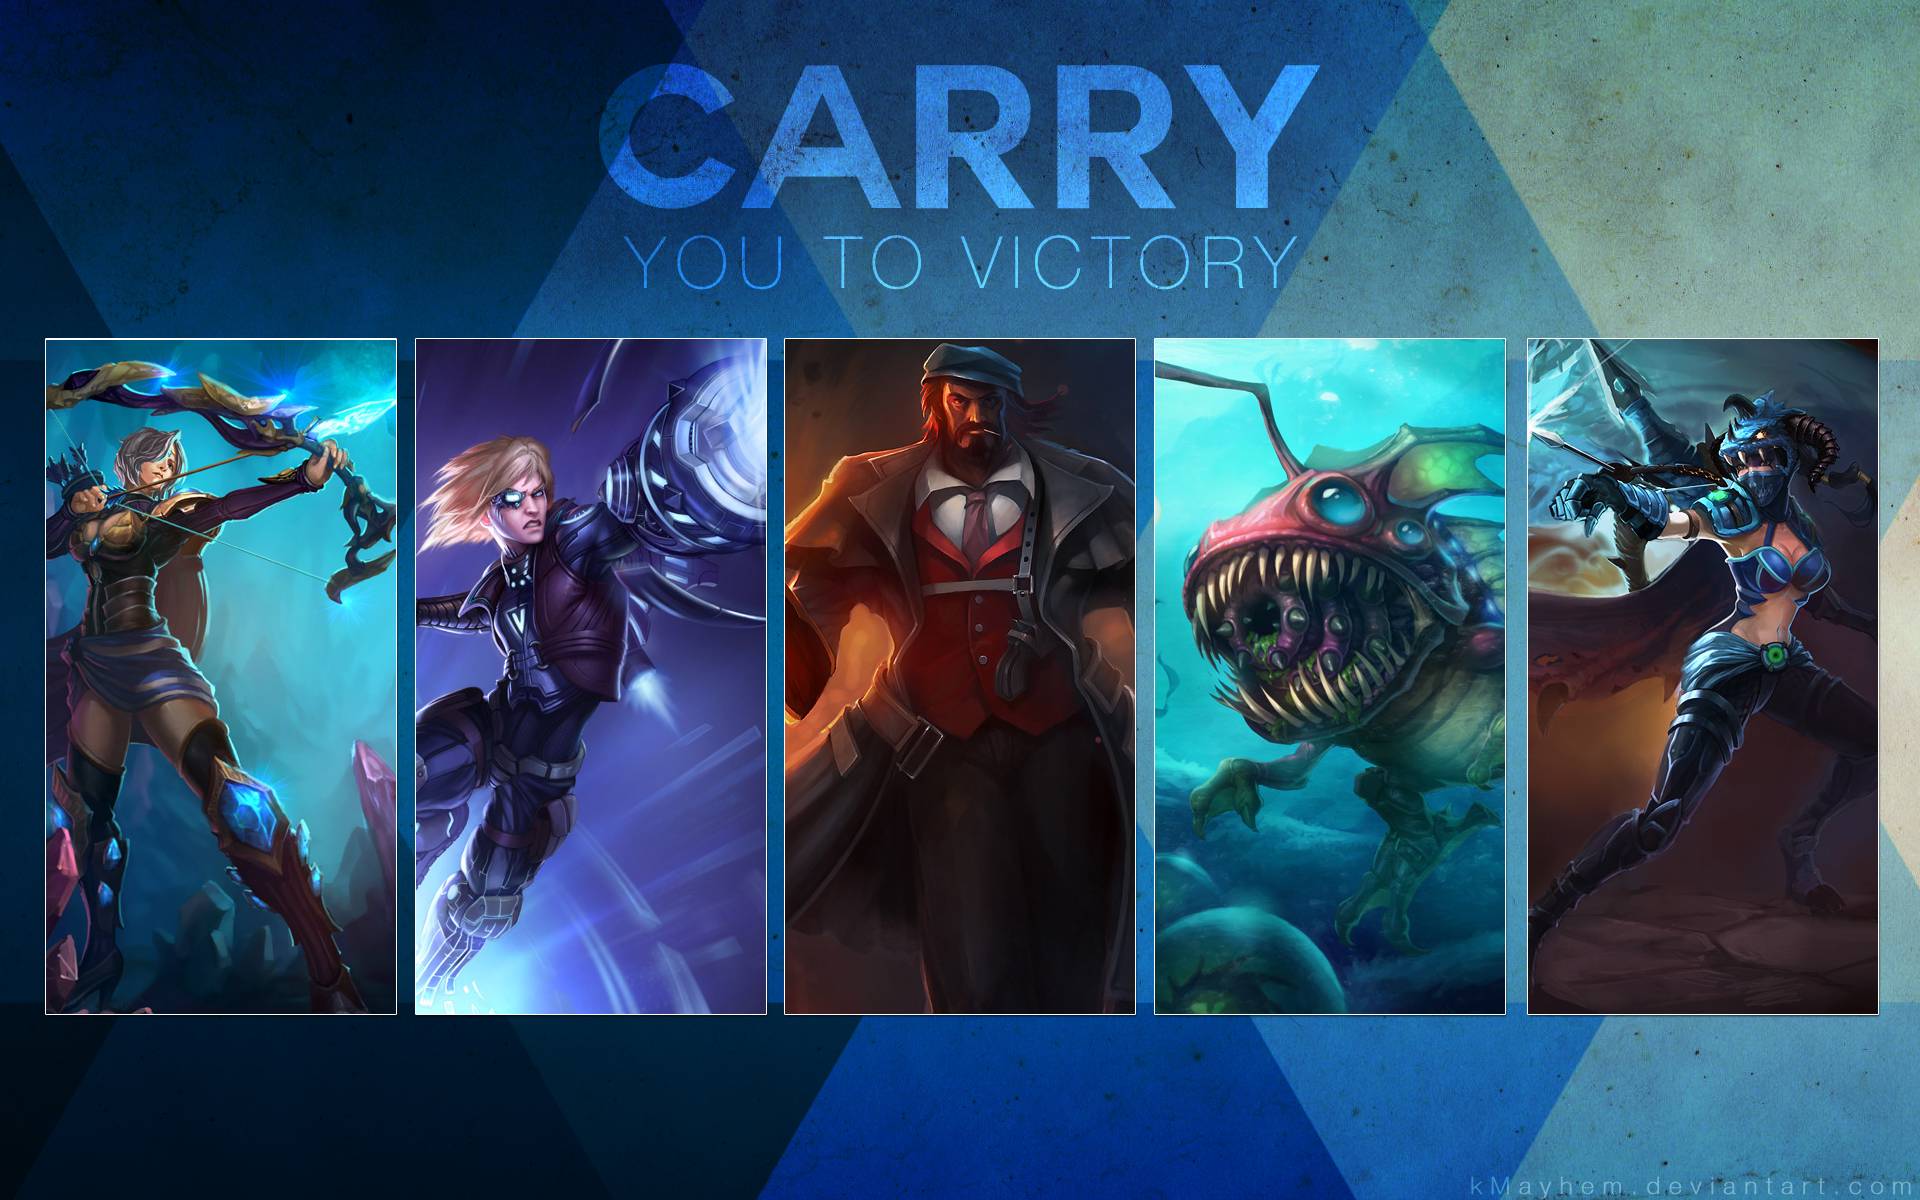 Ad Carry Wallpaper